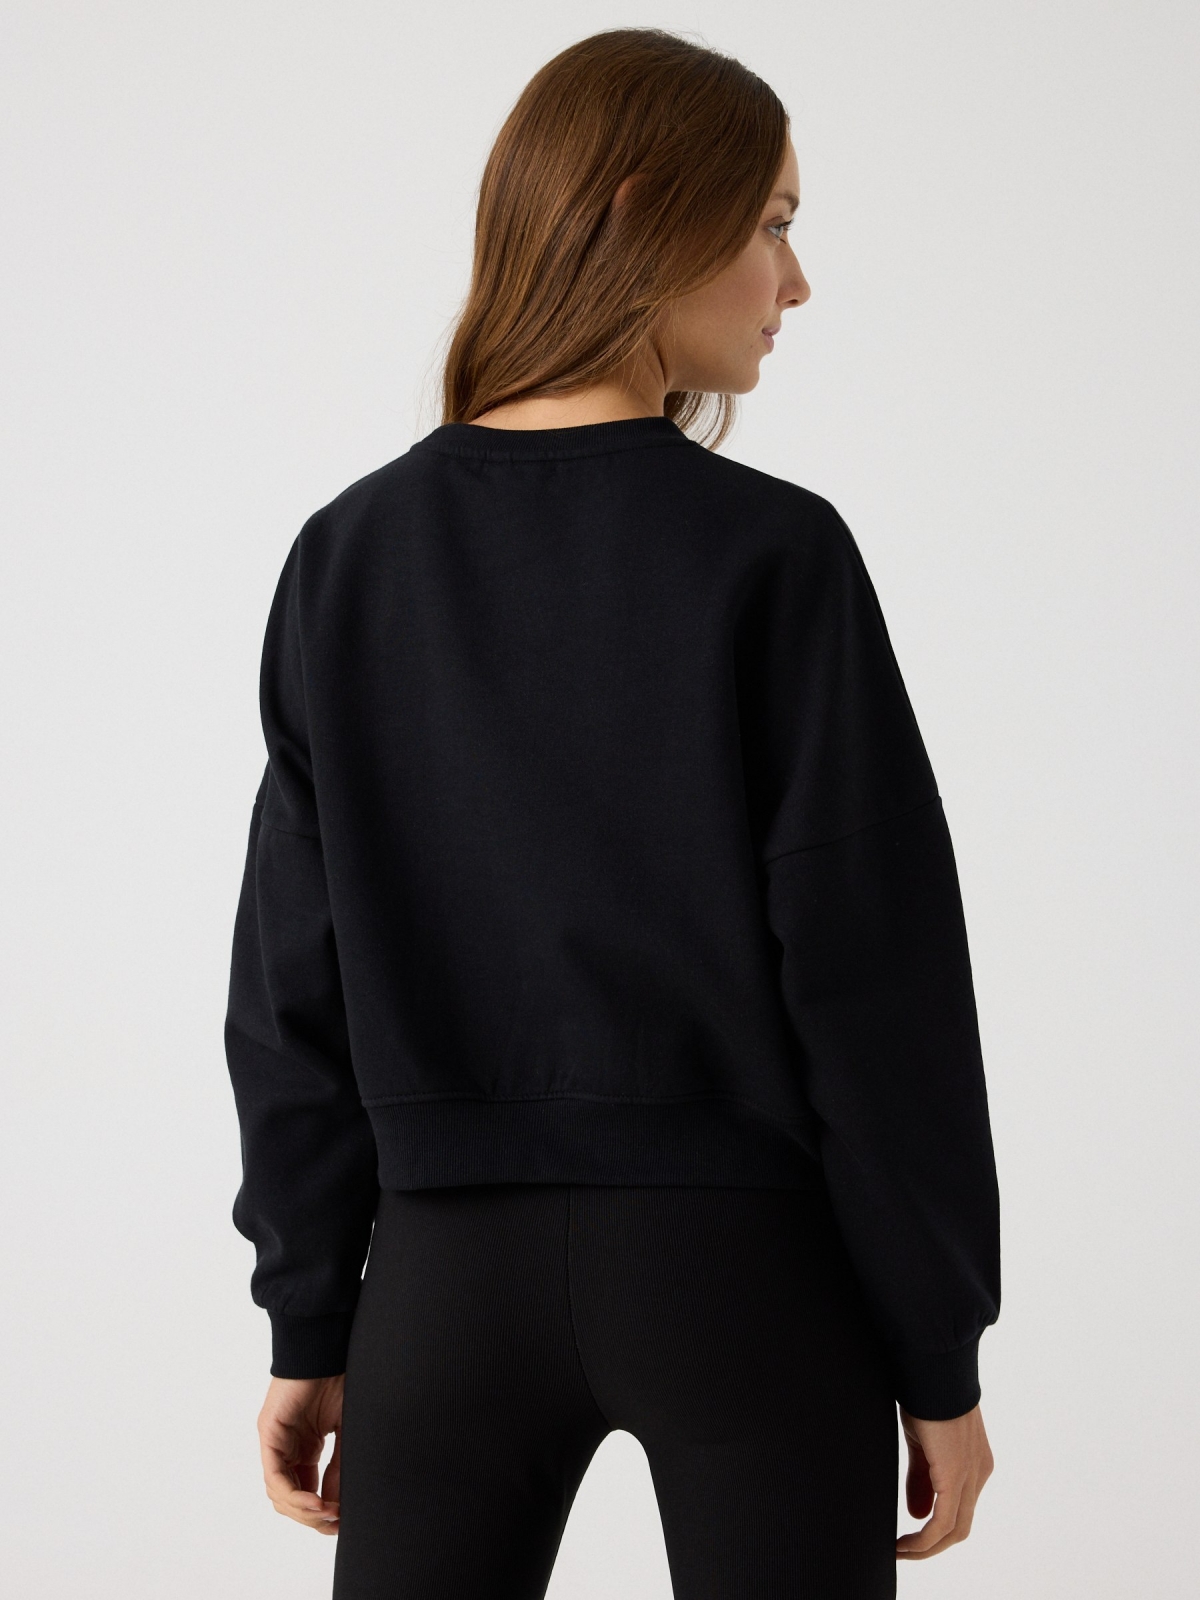 Snoopy cropped sweatshirt black middle back view